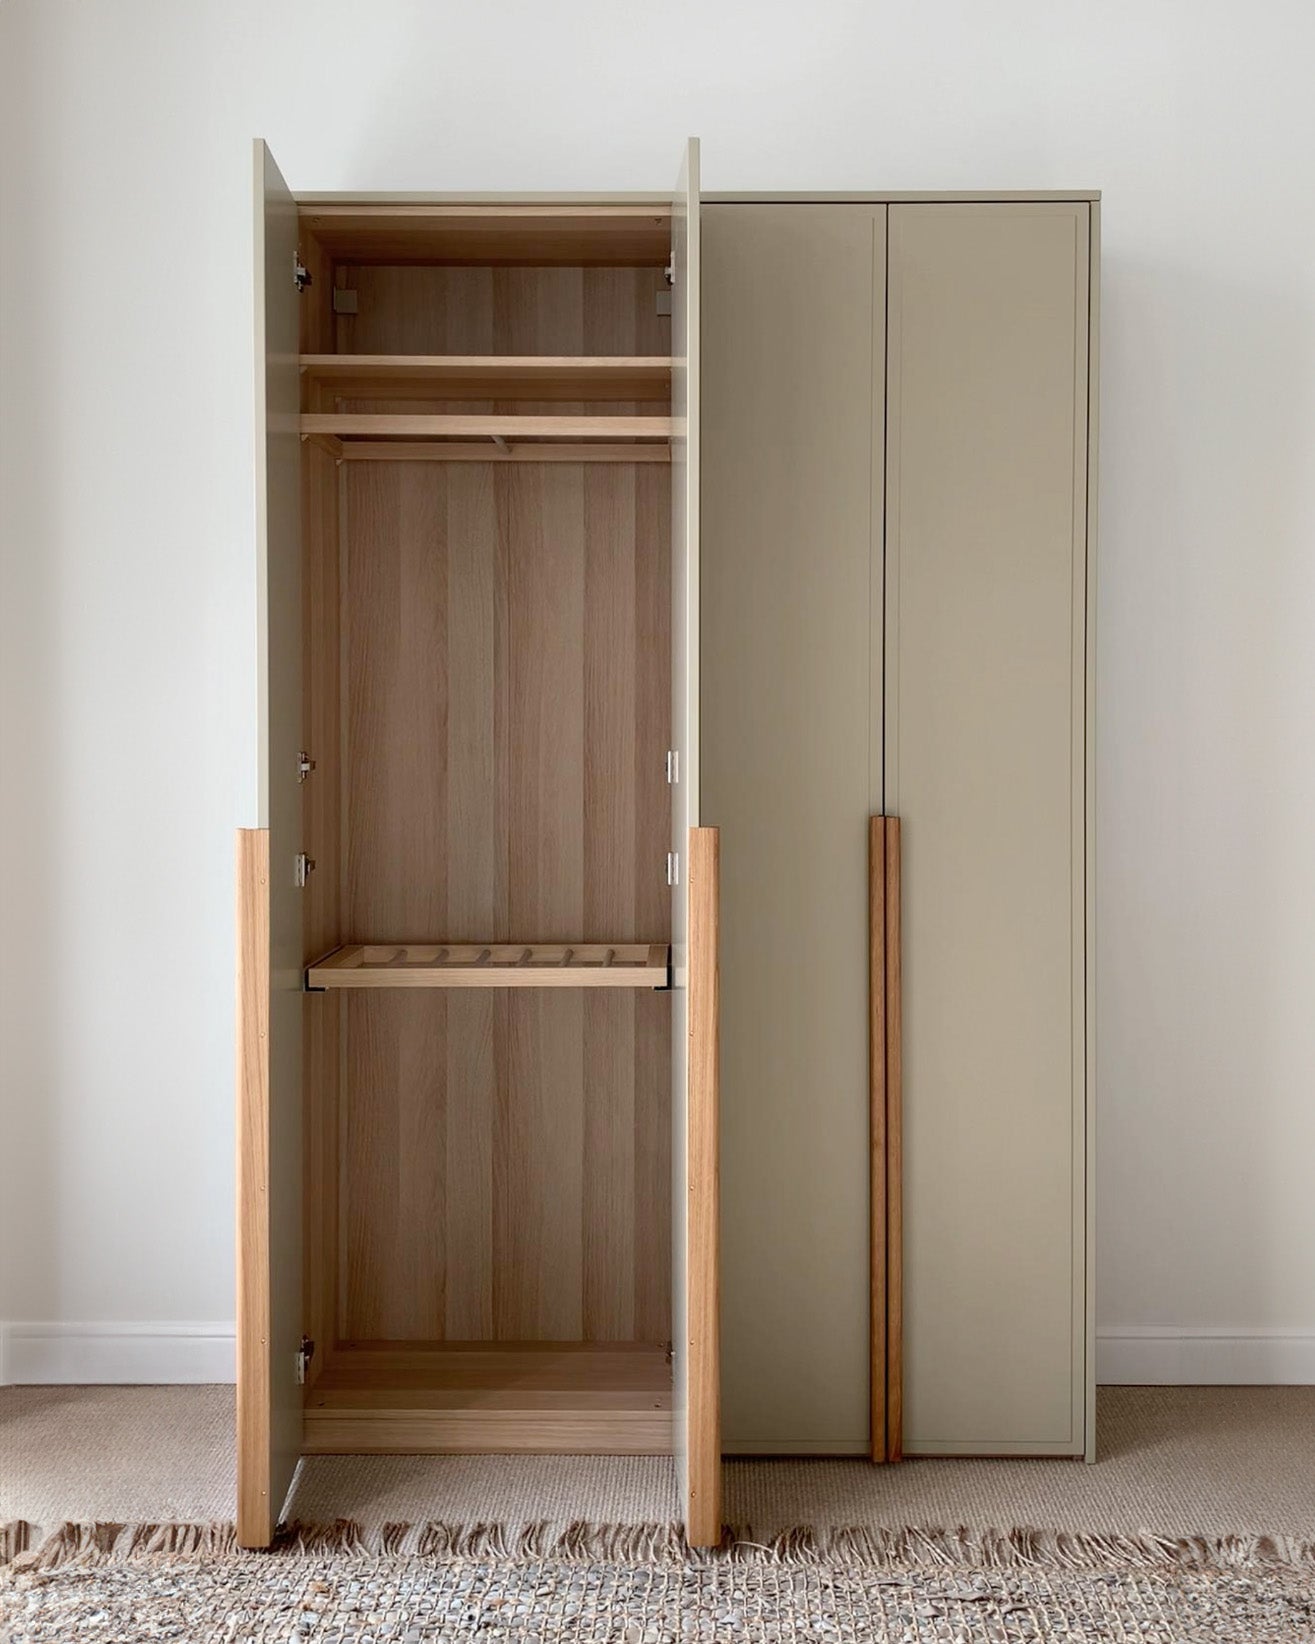 A.S.Helsingö Lalax wardrobe with open doors and Ikea Pax frame inside